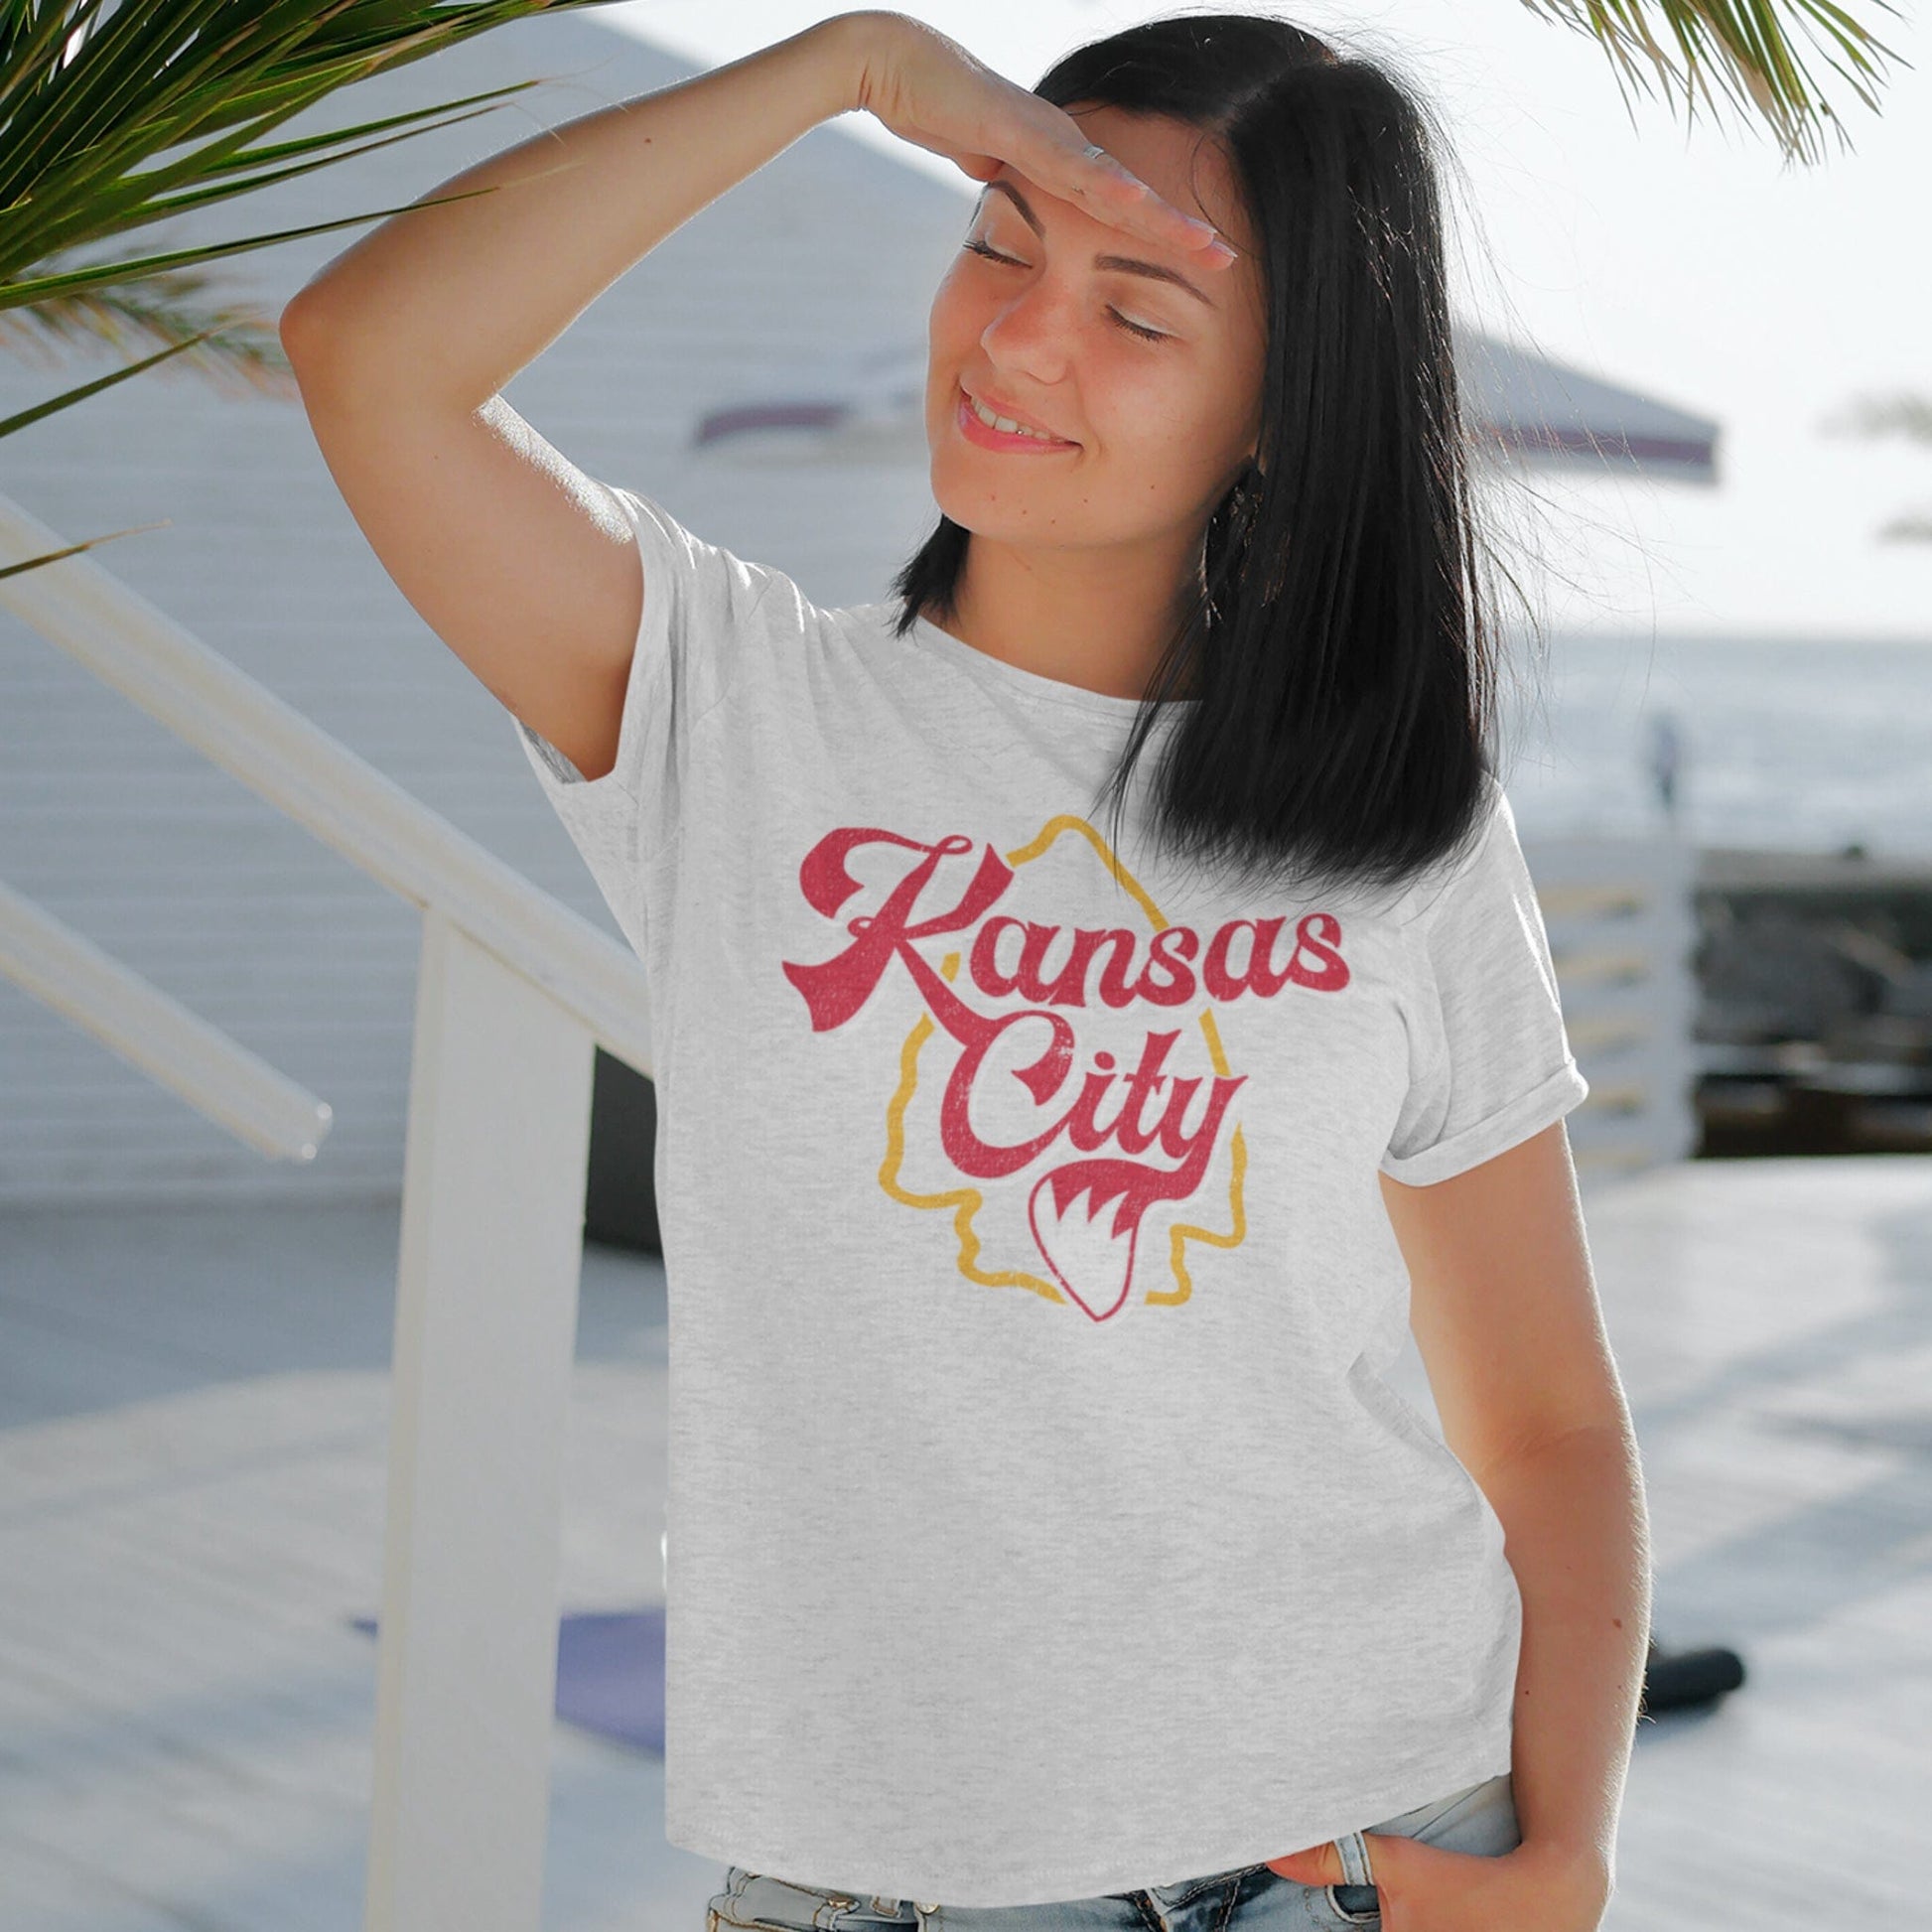 KC Swag Kansas City Chiefs red/yellow KANSAS CITY (with foxtail) with arrowhead graphic on ash t-shirt worn by female model in open-air patio